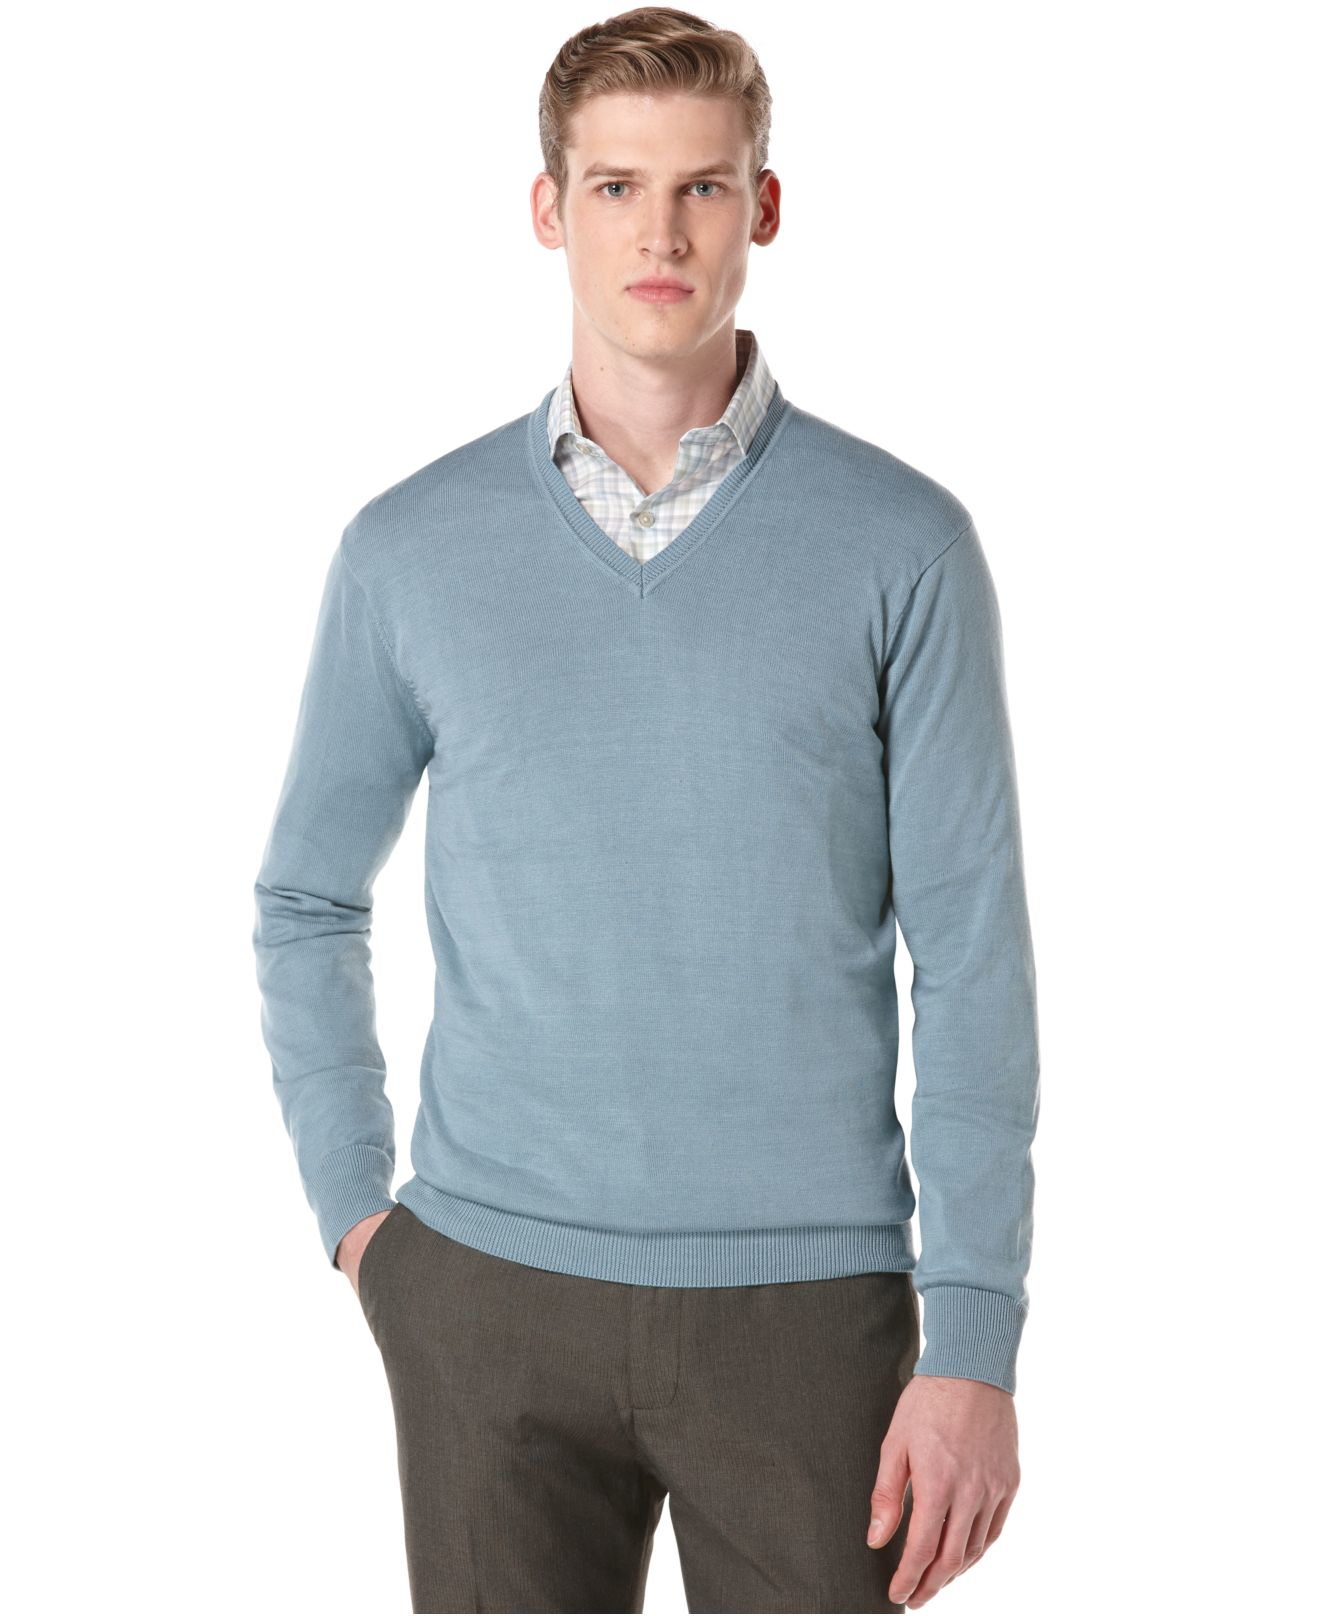 Lyst - Perry Ellis Long-sleeve Solid V-neck Sweater in Blue for Men